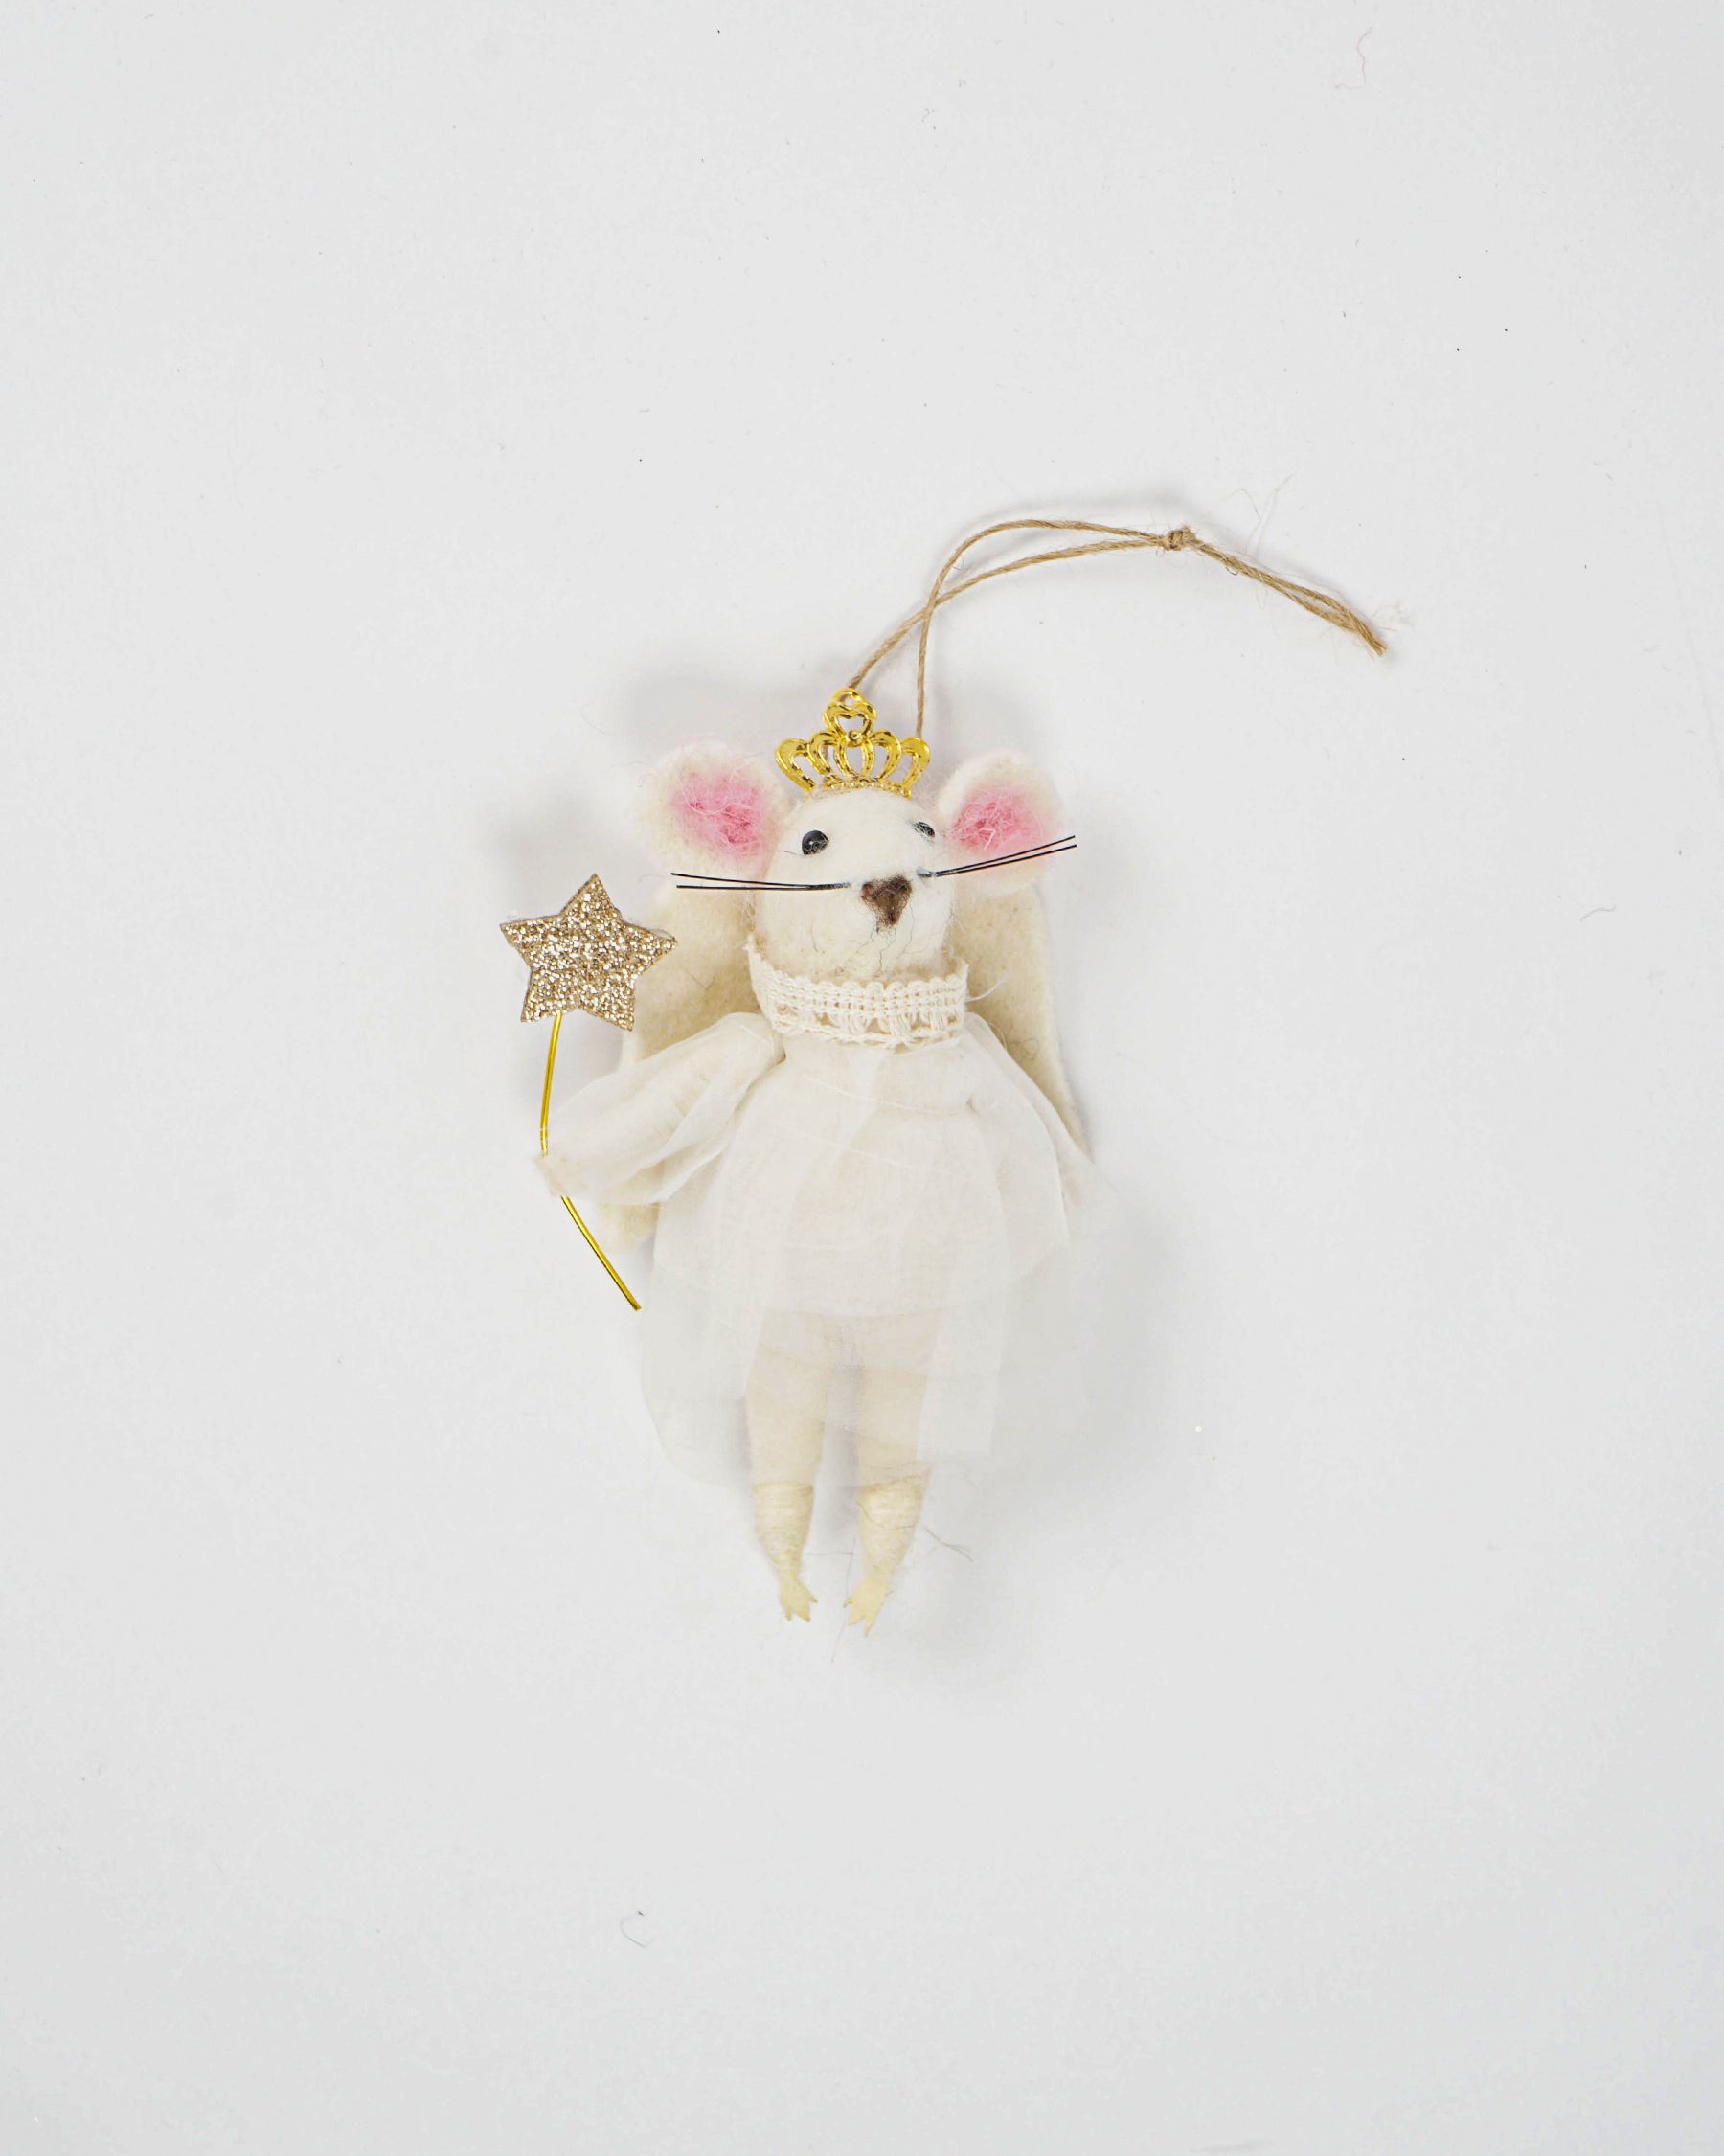 Angel Mouse Ornament